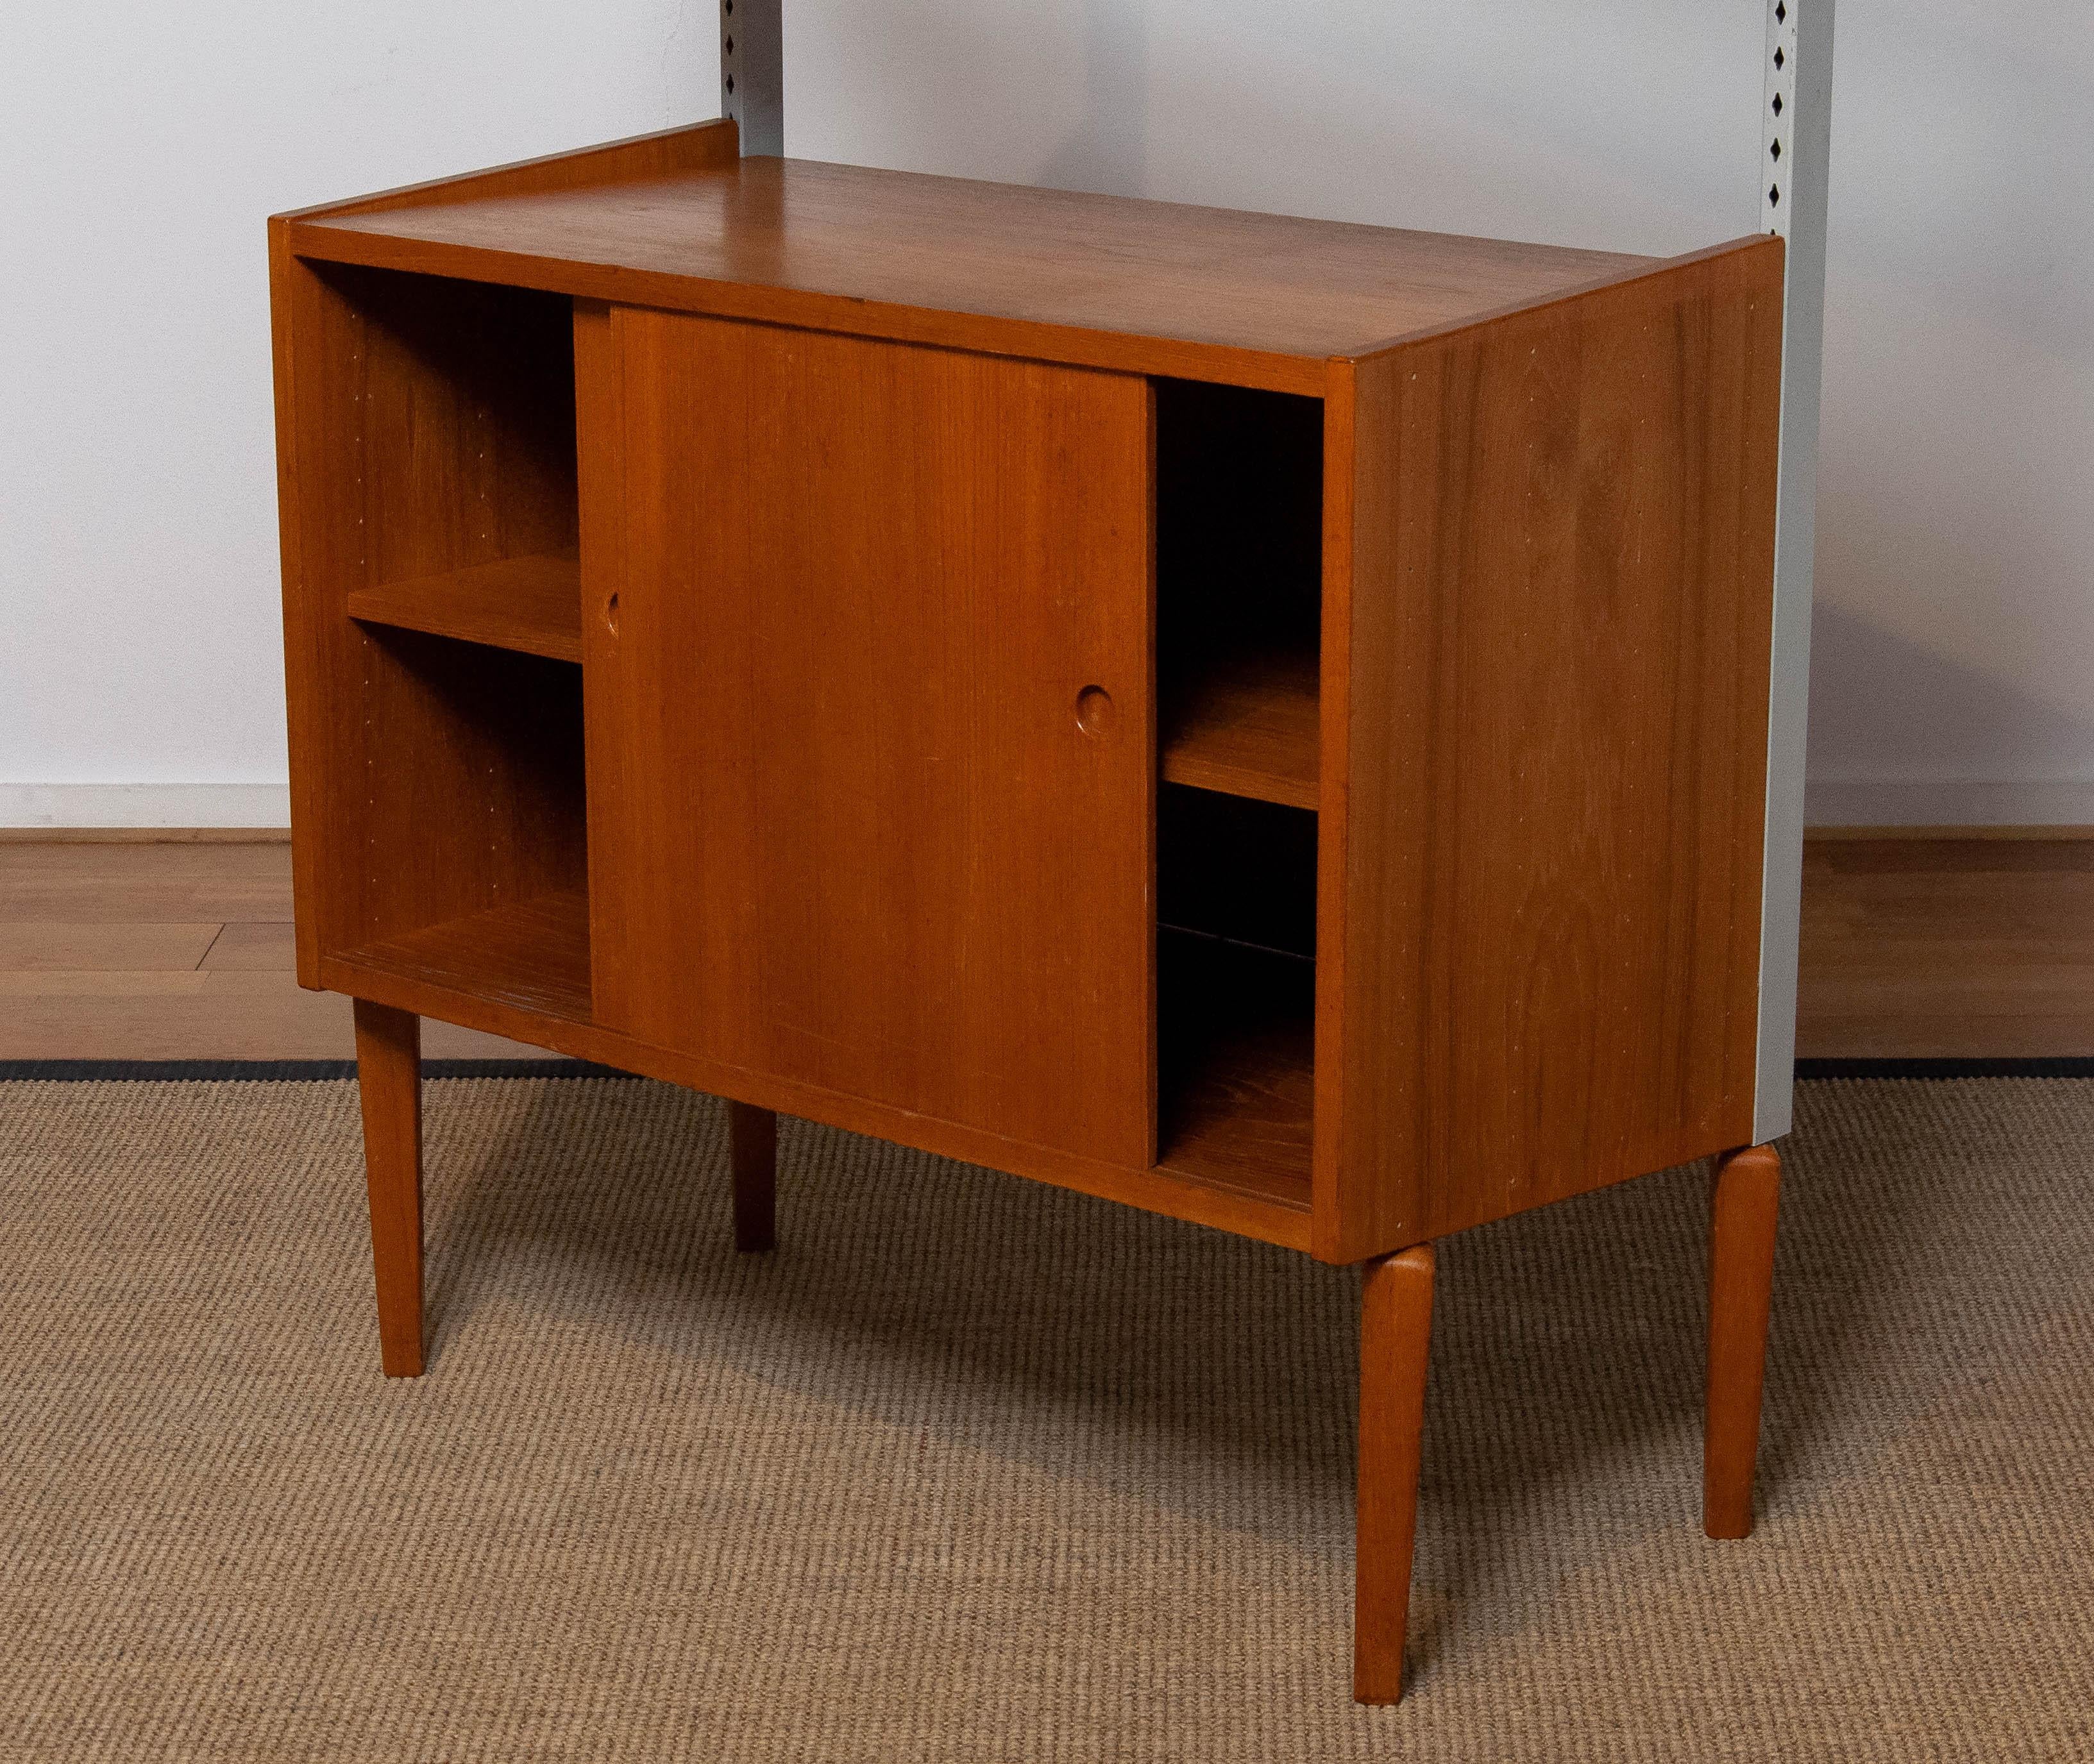 Teak Shelf System / Bookcase In Teak With Steel Bars By Harald Lundqvist 1950's 1